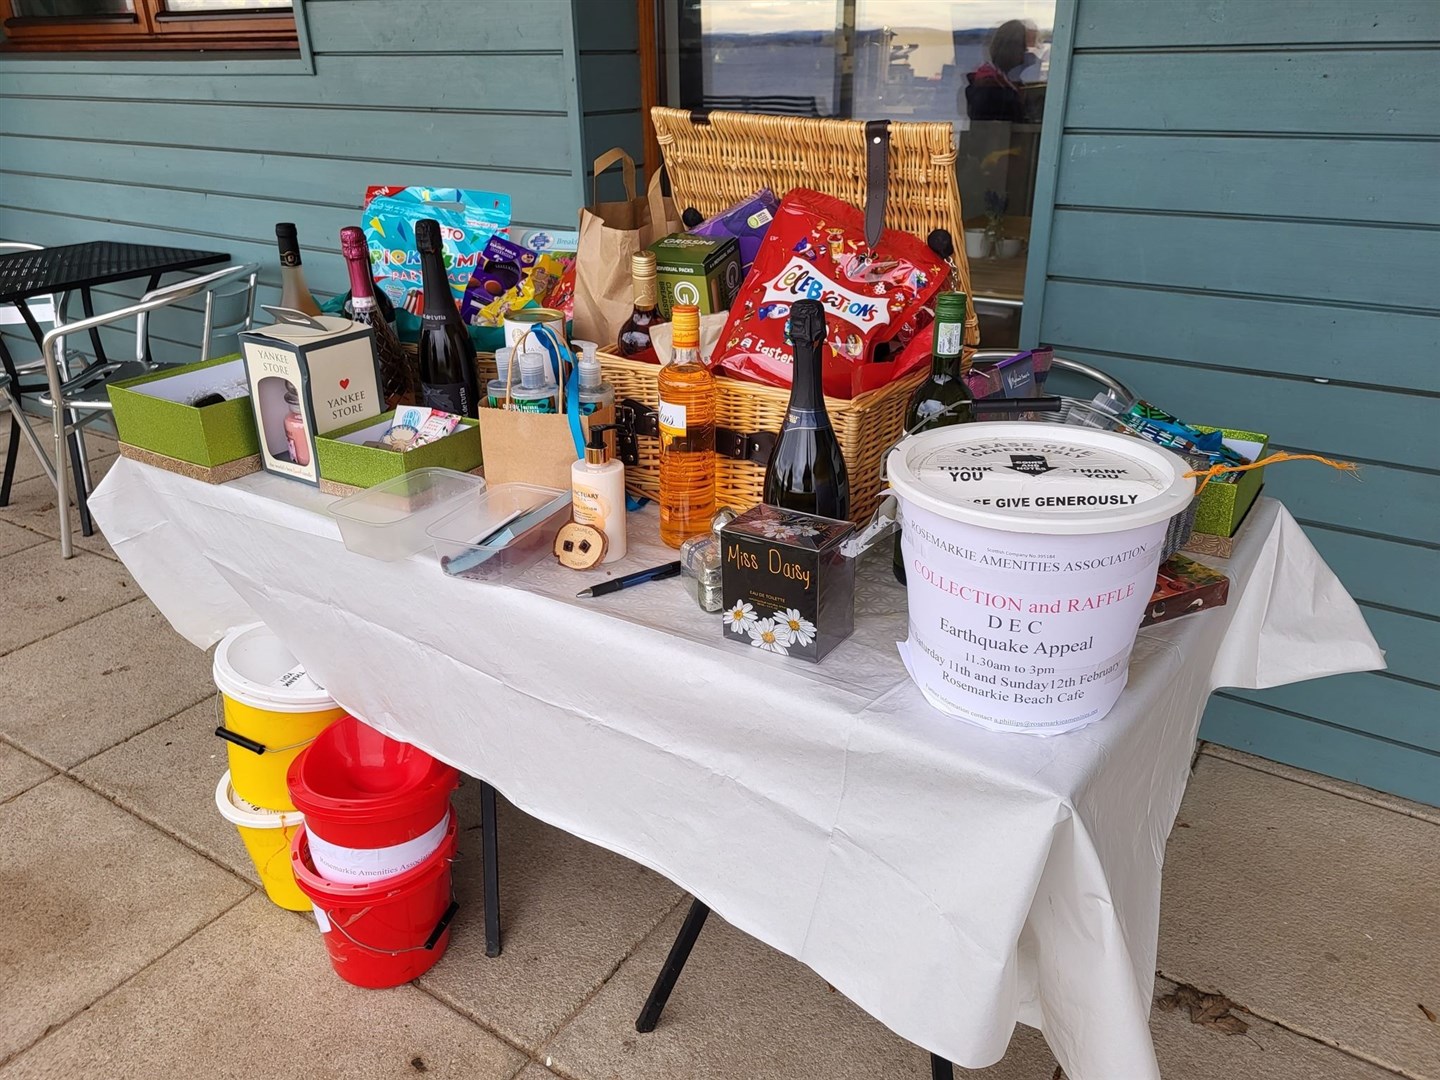 Collection buckets and a raffle at the Rosemarkie Amenities Association and Beach Cafe this weekend.